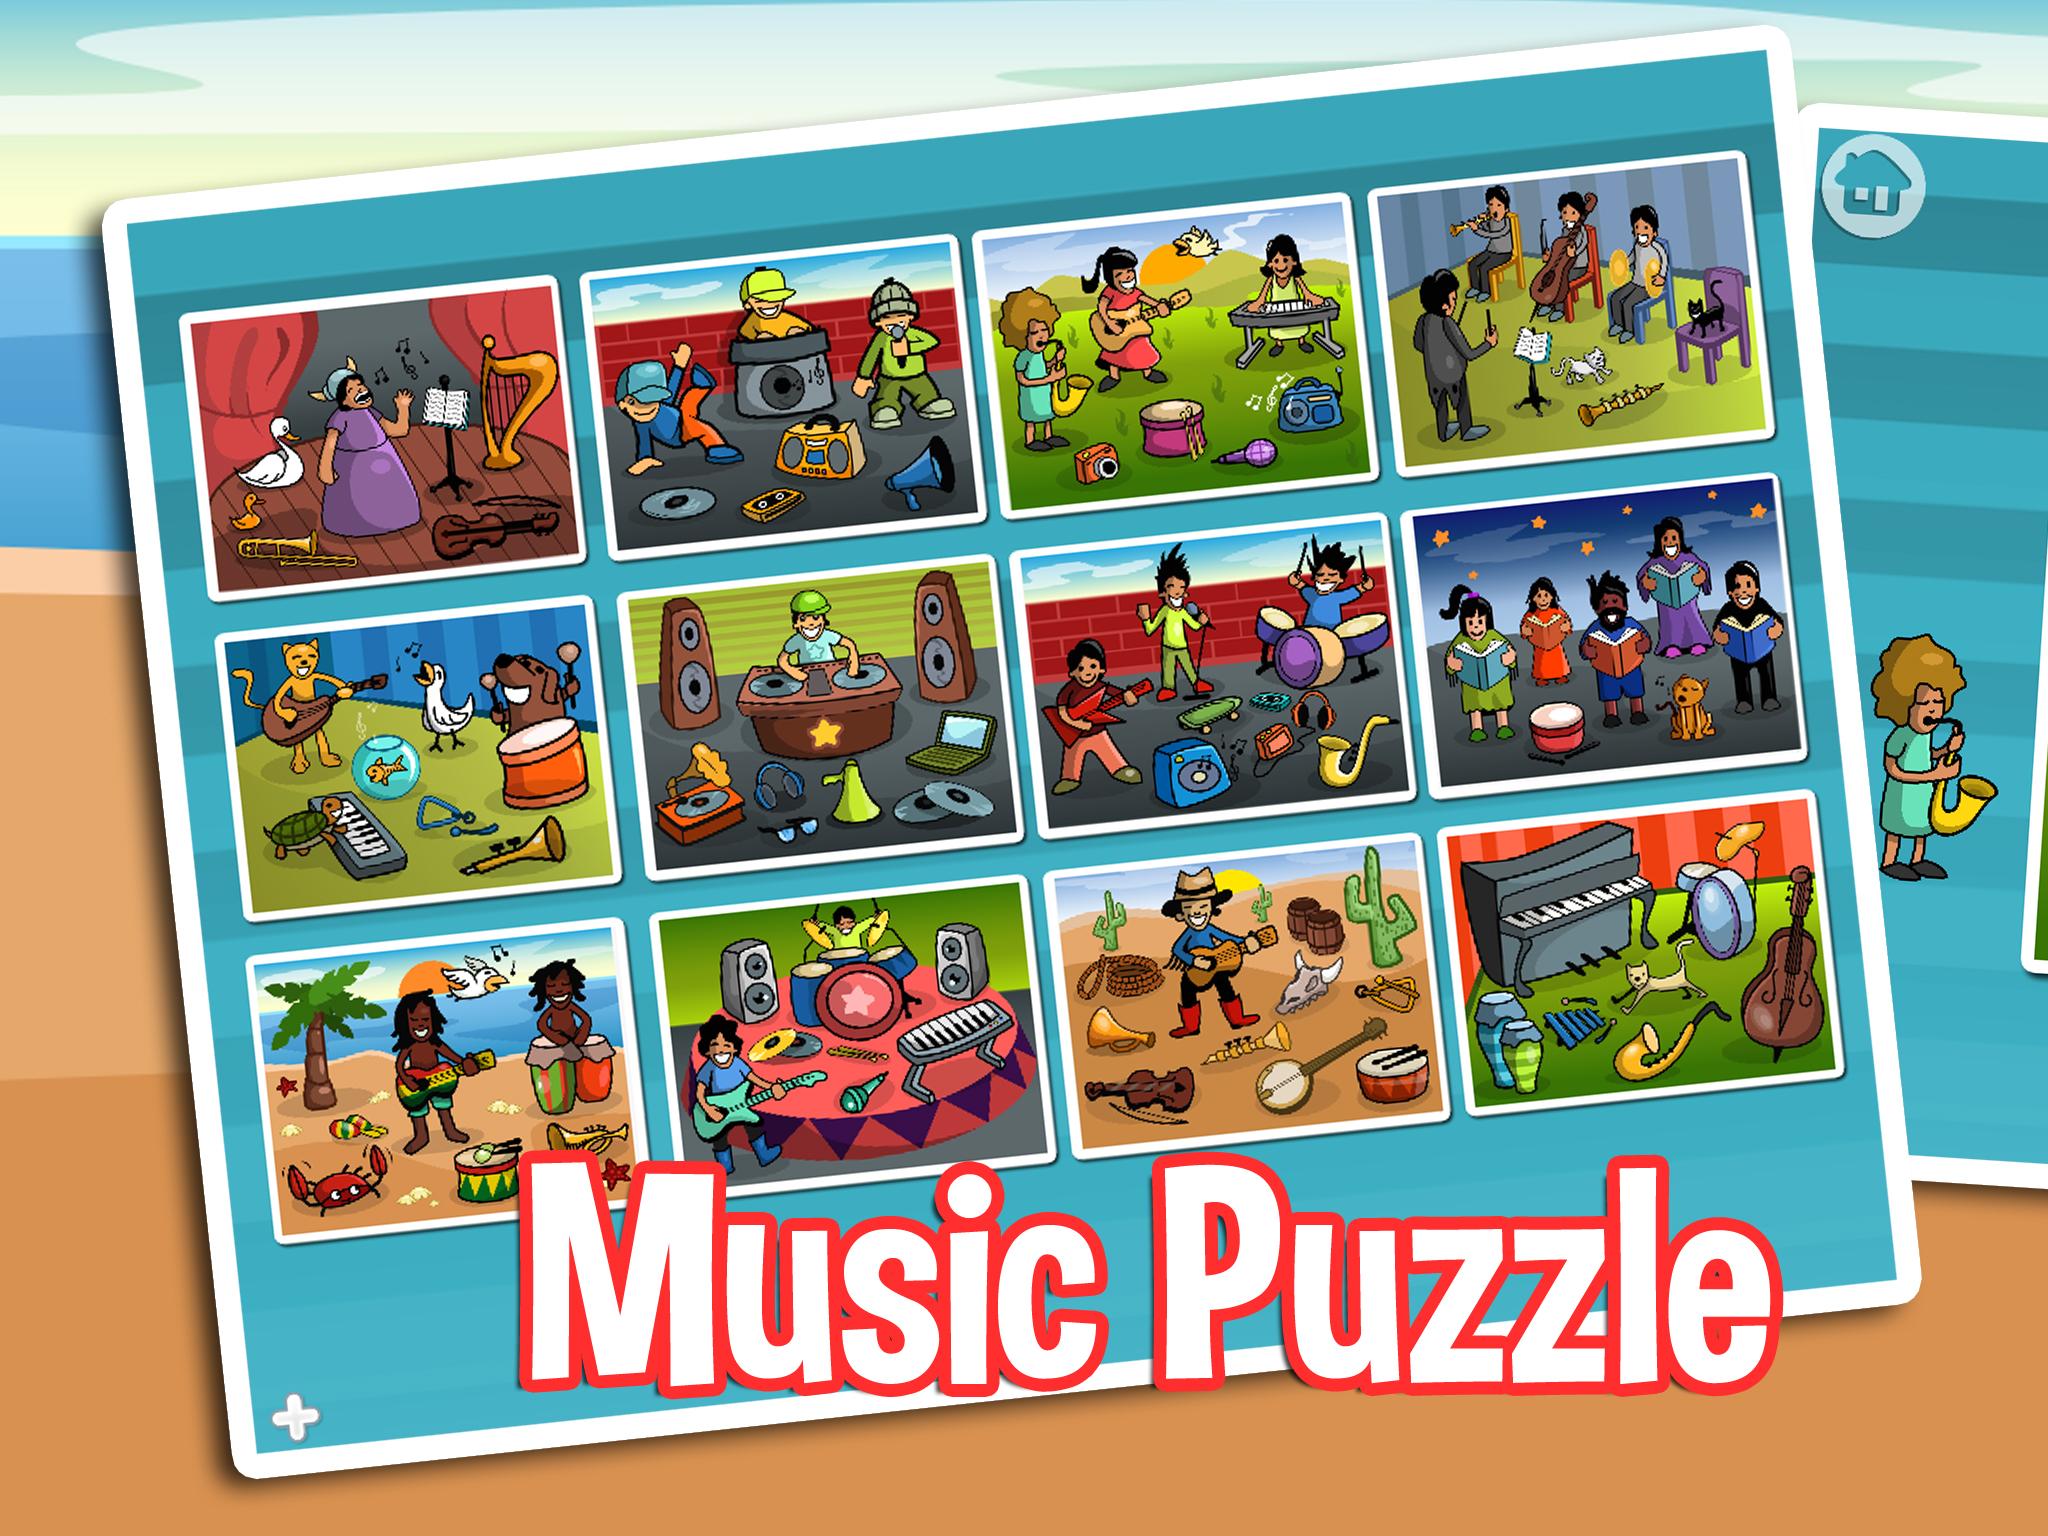 Android application Music Puzzle - Fun for Kids screenshort